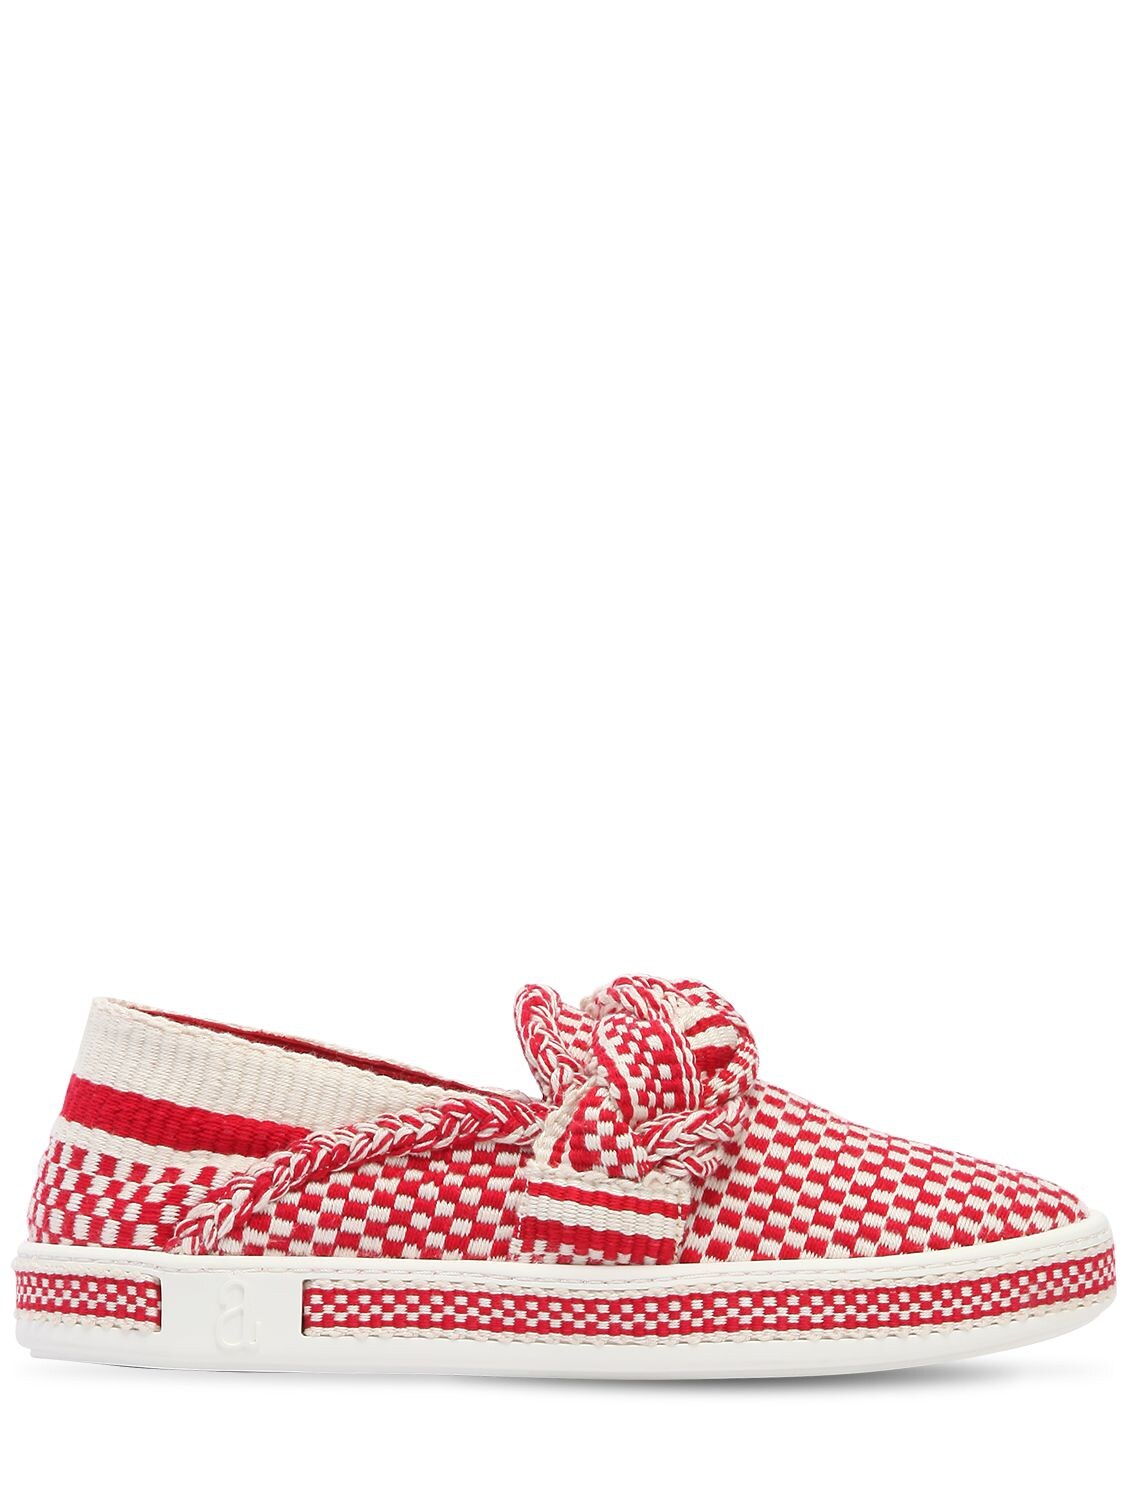 Antolina Paris 20mm Woven Cotton Slip-on Sneakers In Red/white